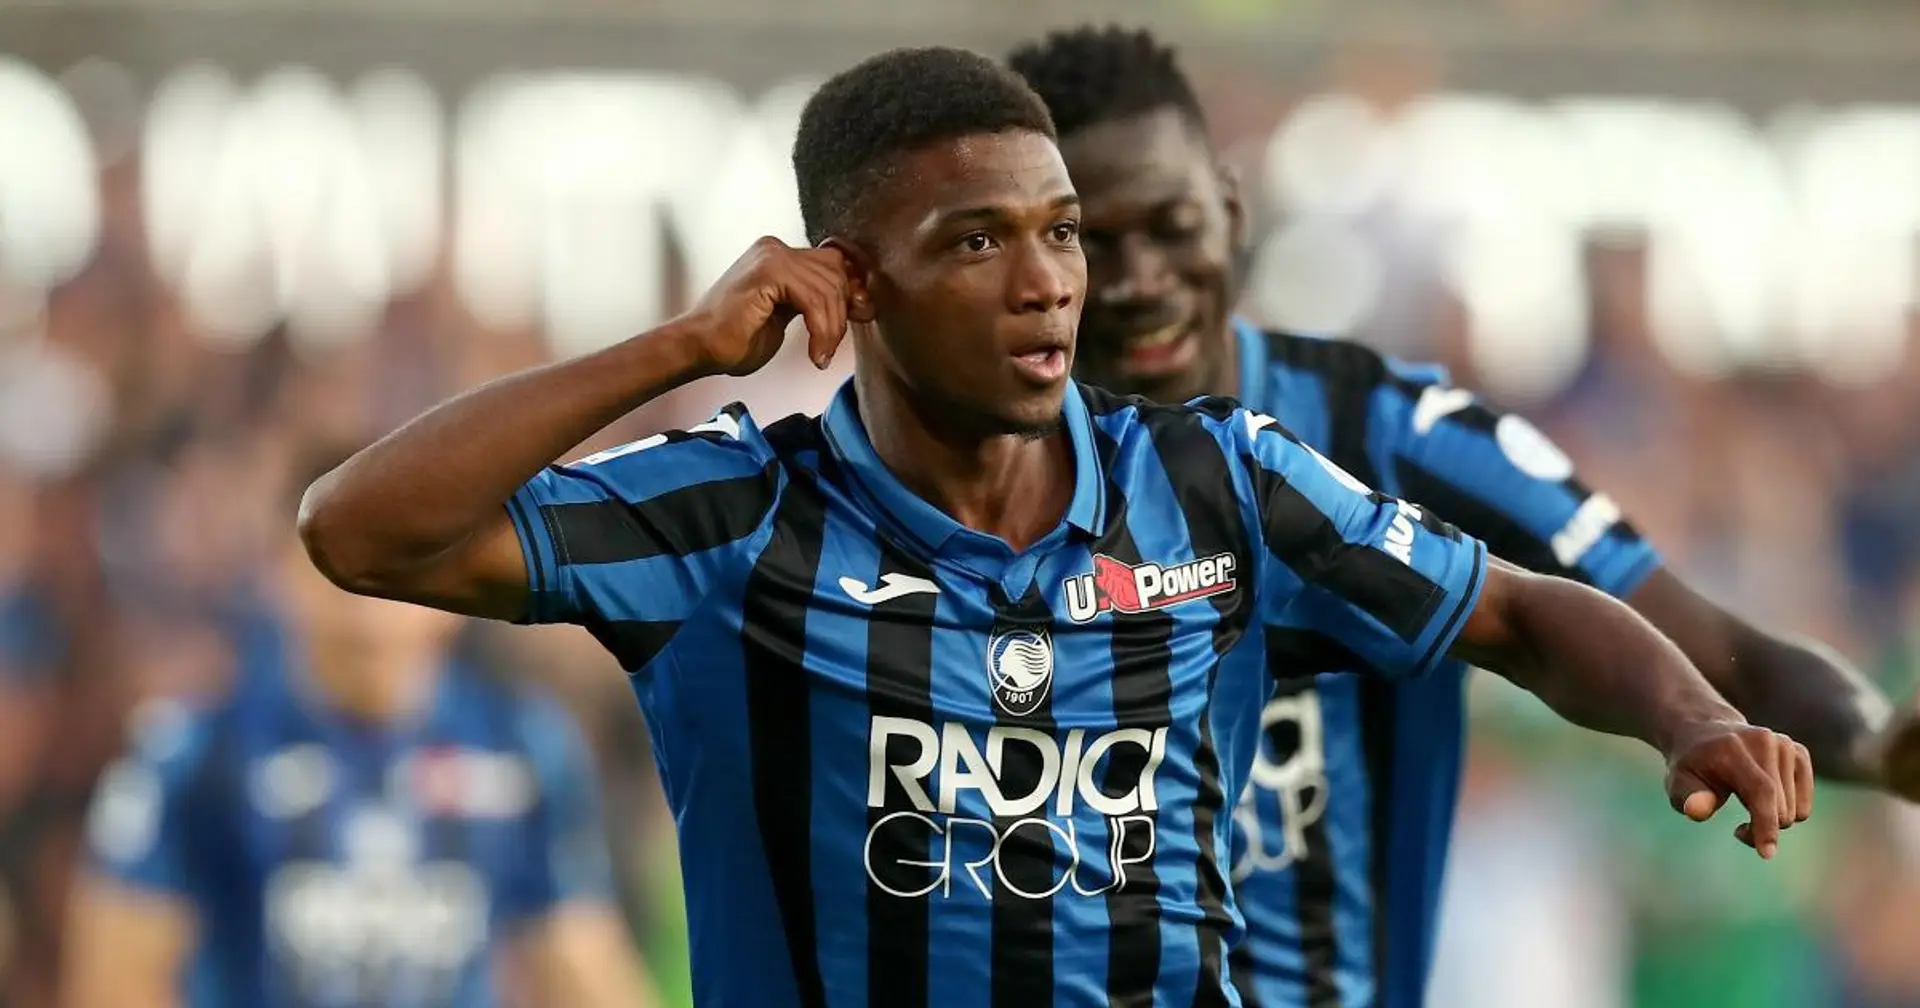 Amad Diallo's Champions League debut will make every Man United fan proud: 4 key stats that show his skills